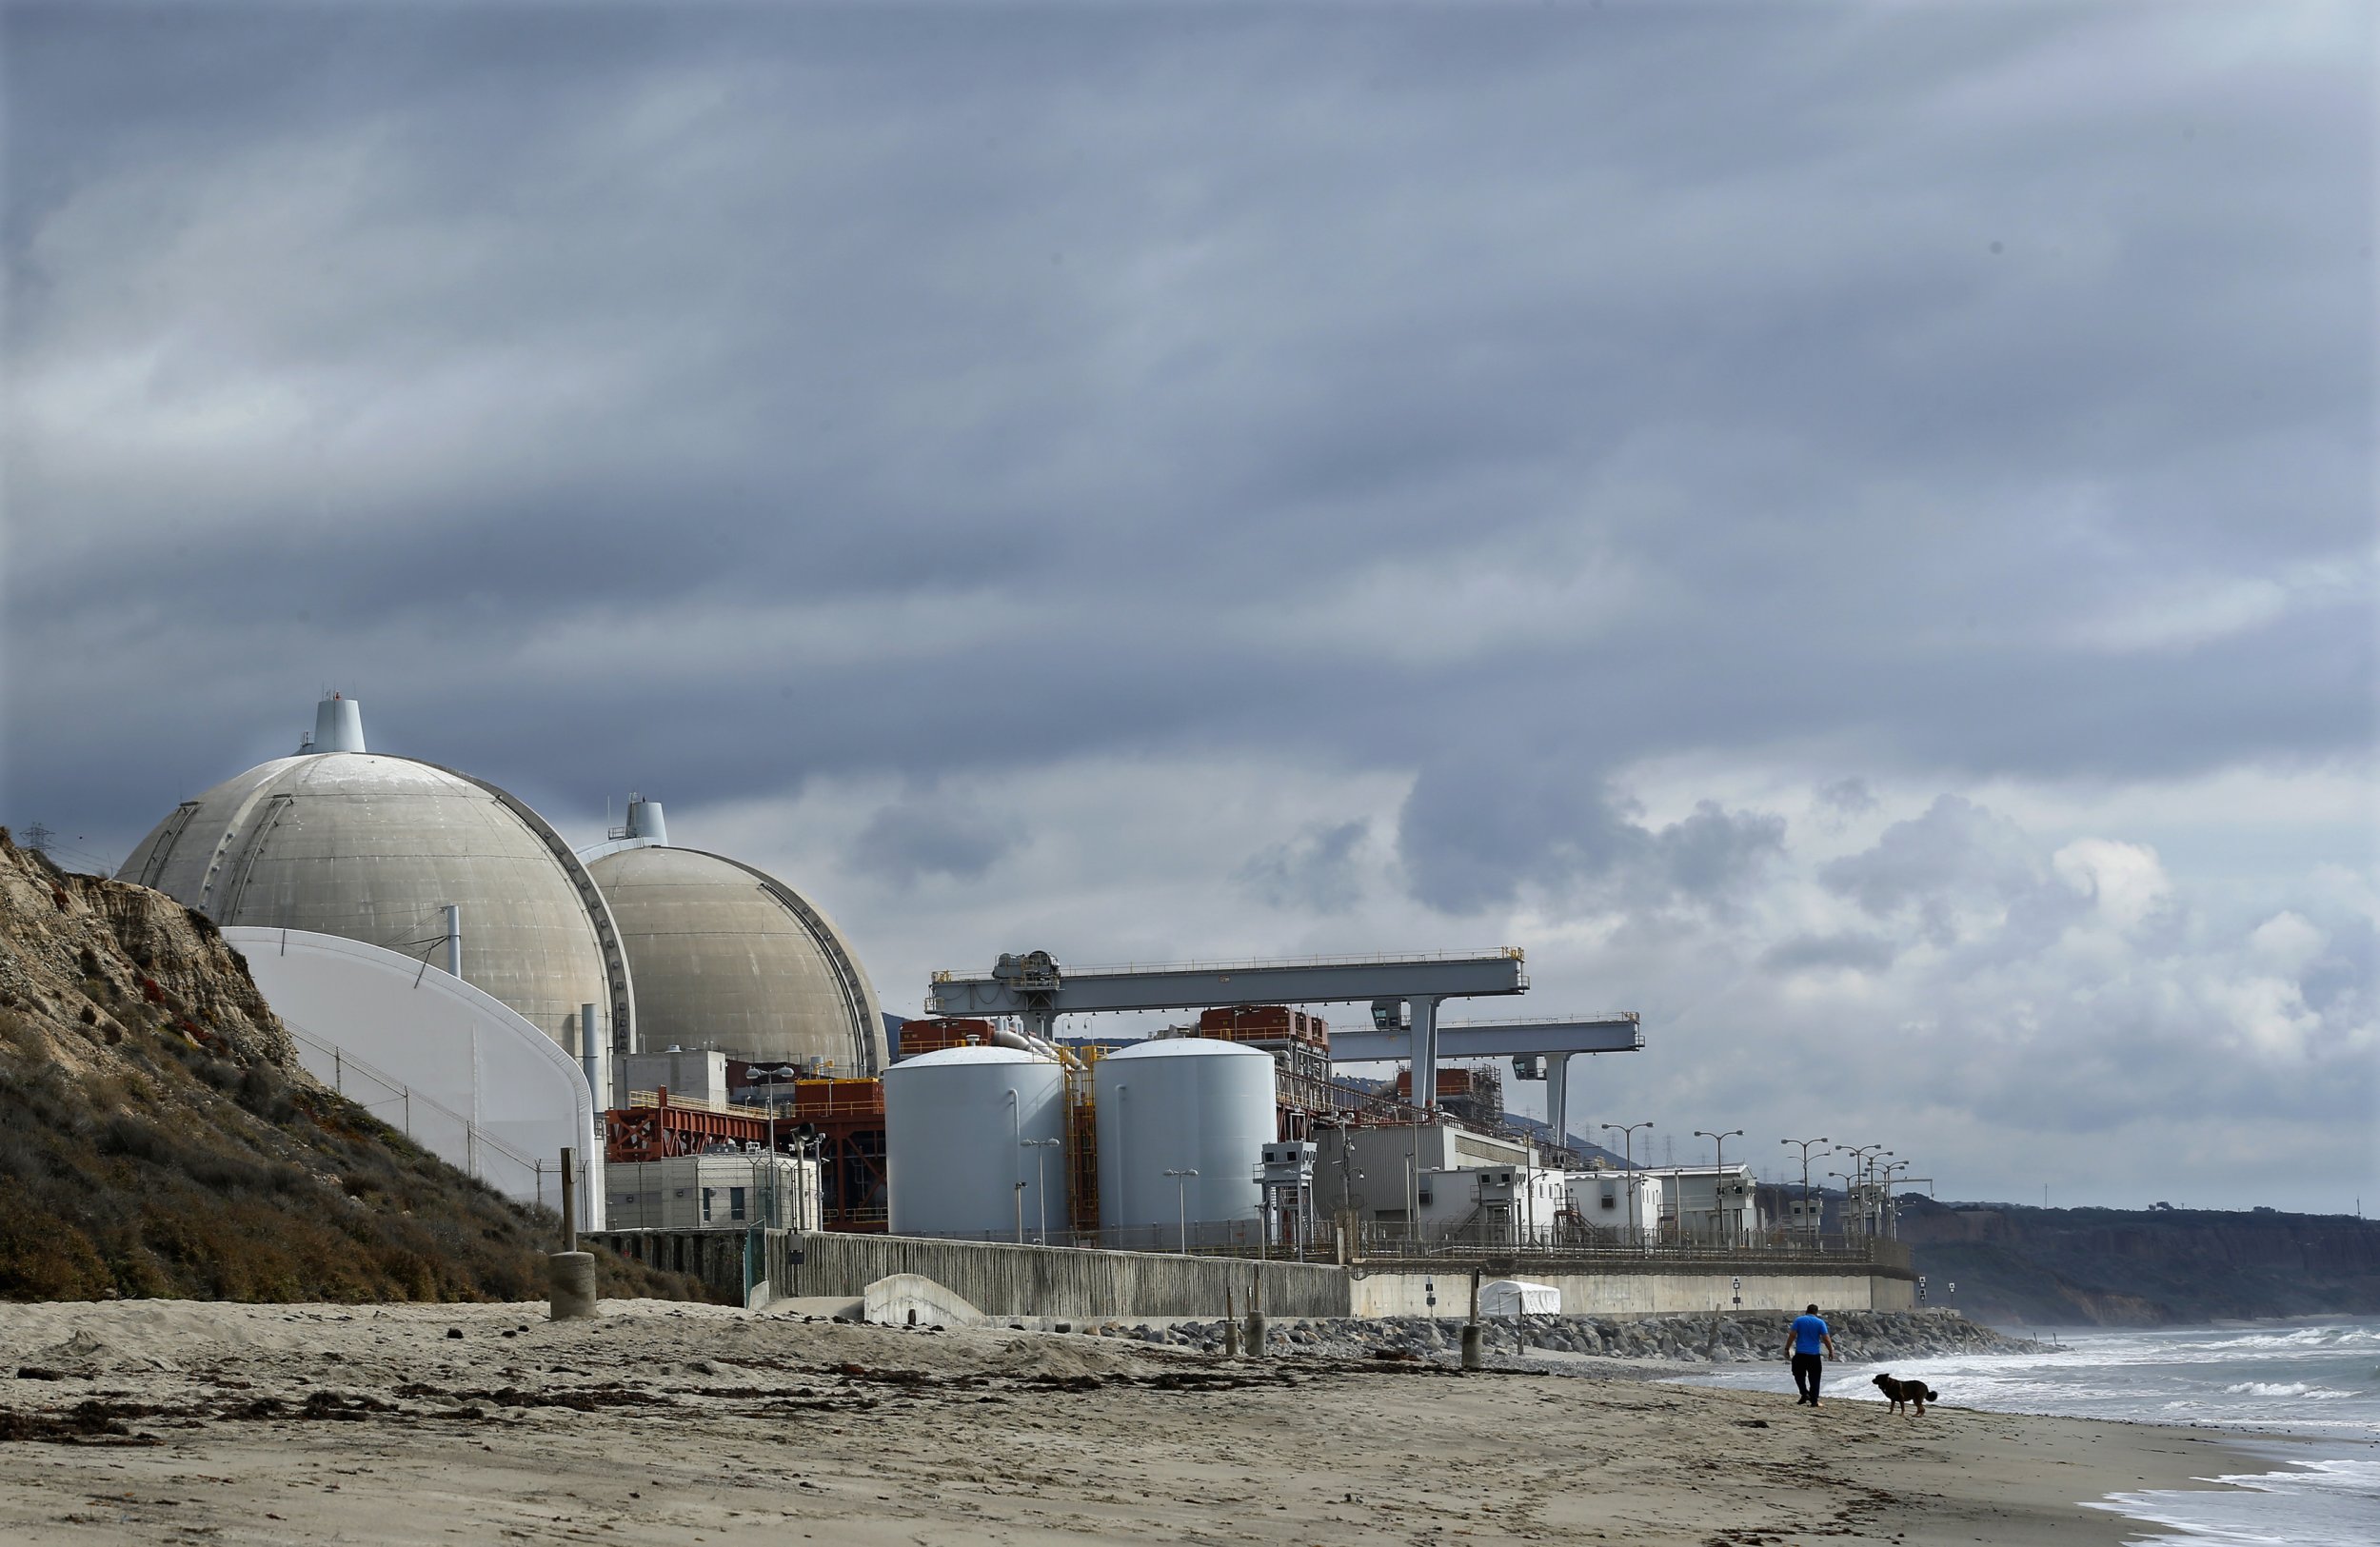 San Onofre Nuclear Power Plant